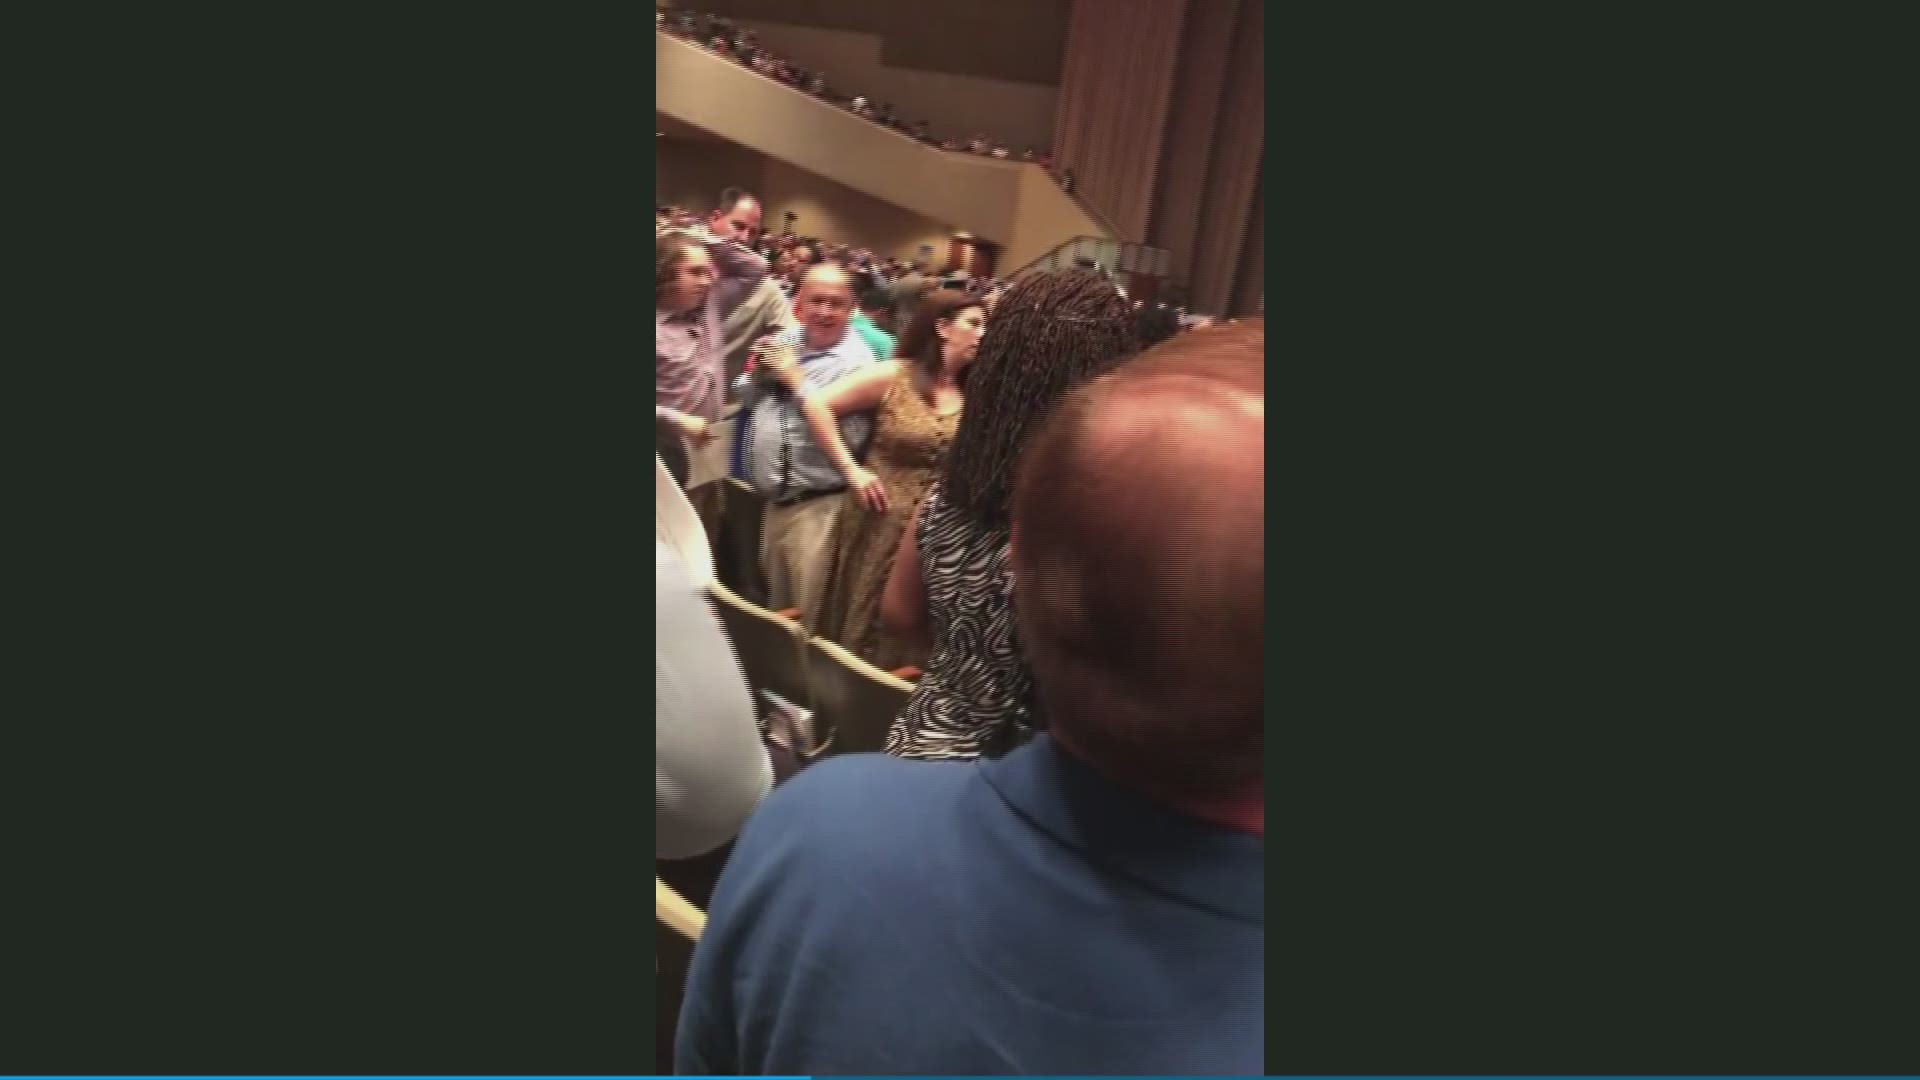 **Warning, contains adult language** A fight broke out during the Arlington High graduation at students were processing into Bellevue Baptist Church. Submitted to The Commercial Appeal